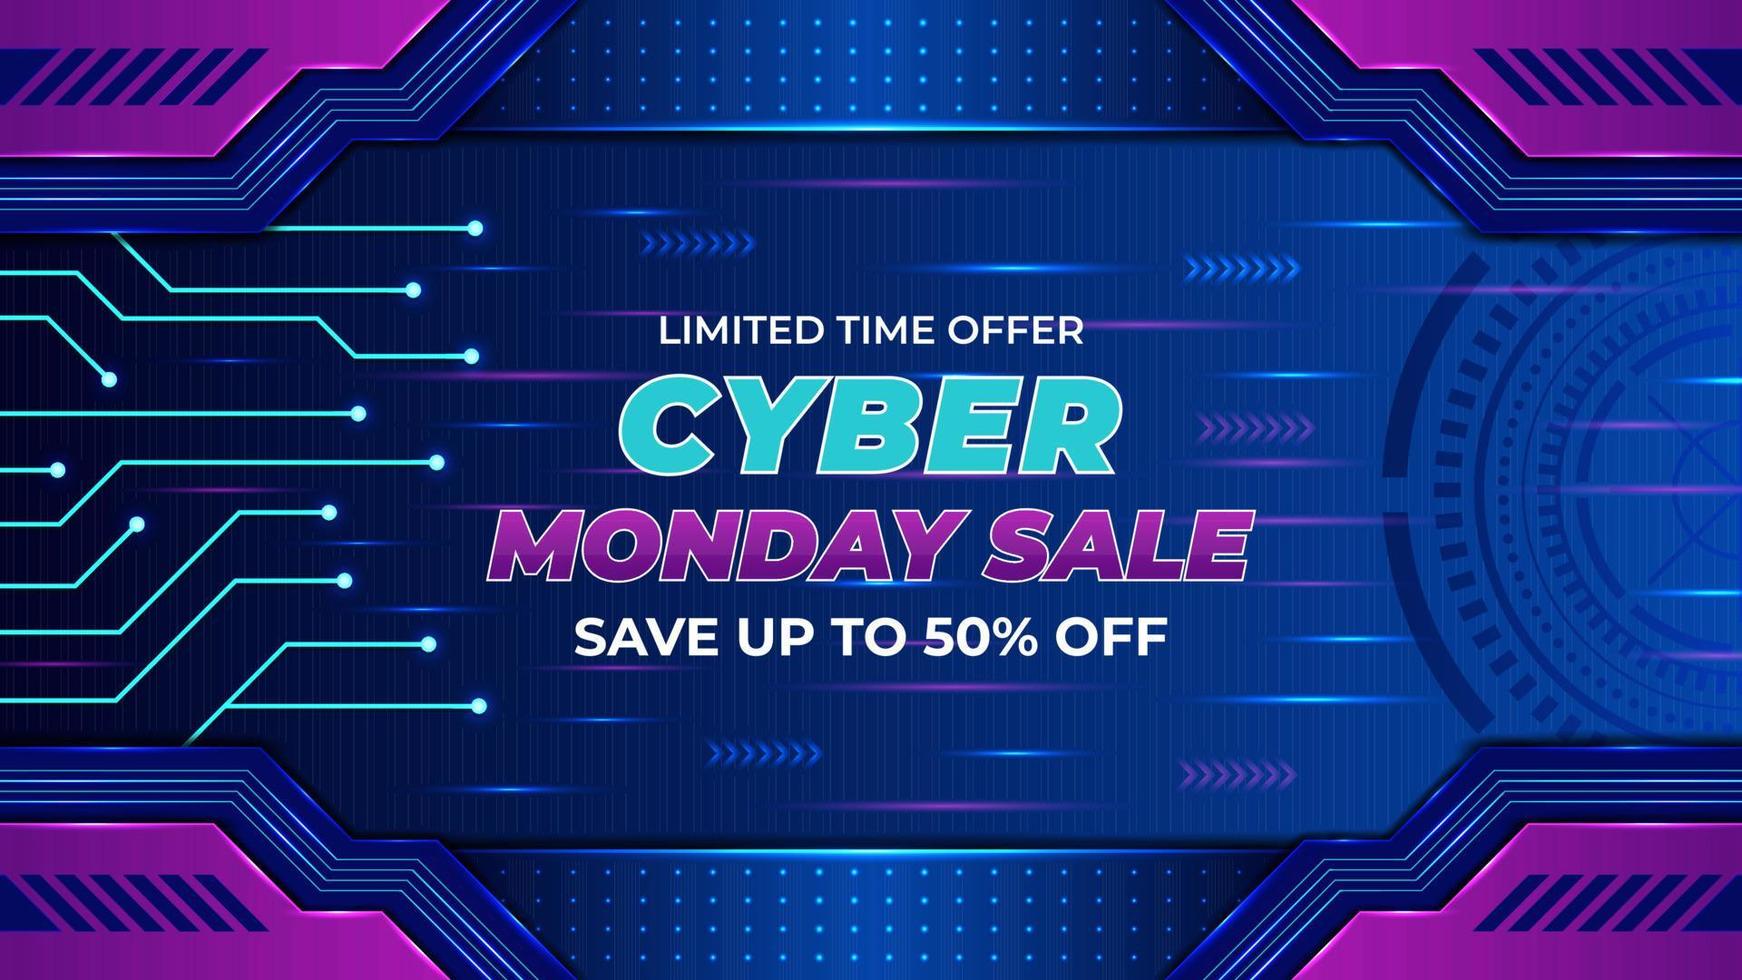 Abstract modern cyber monday technology background design vector